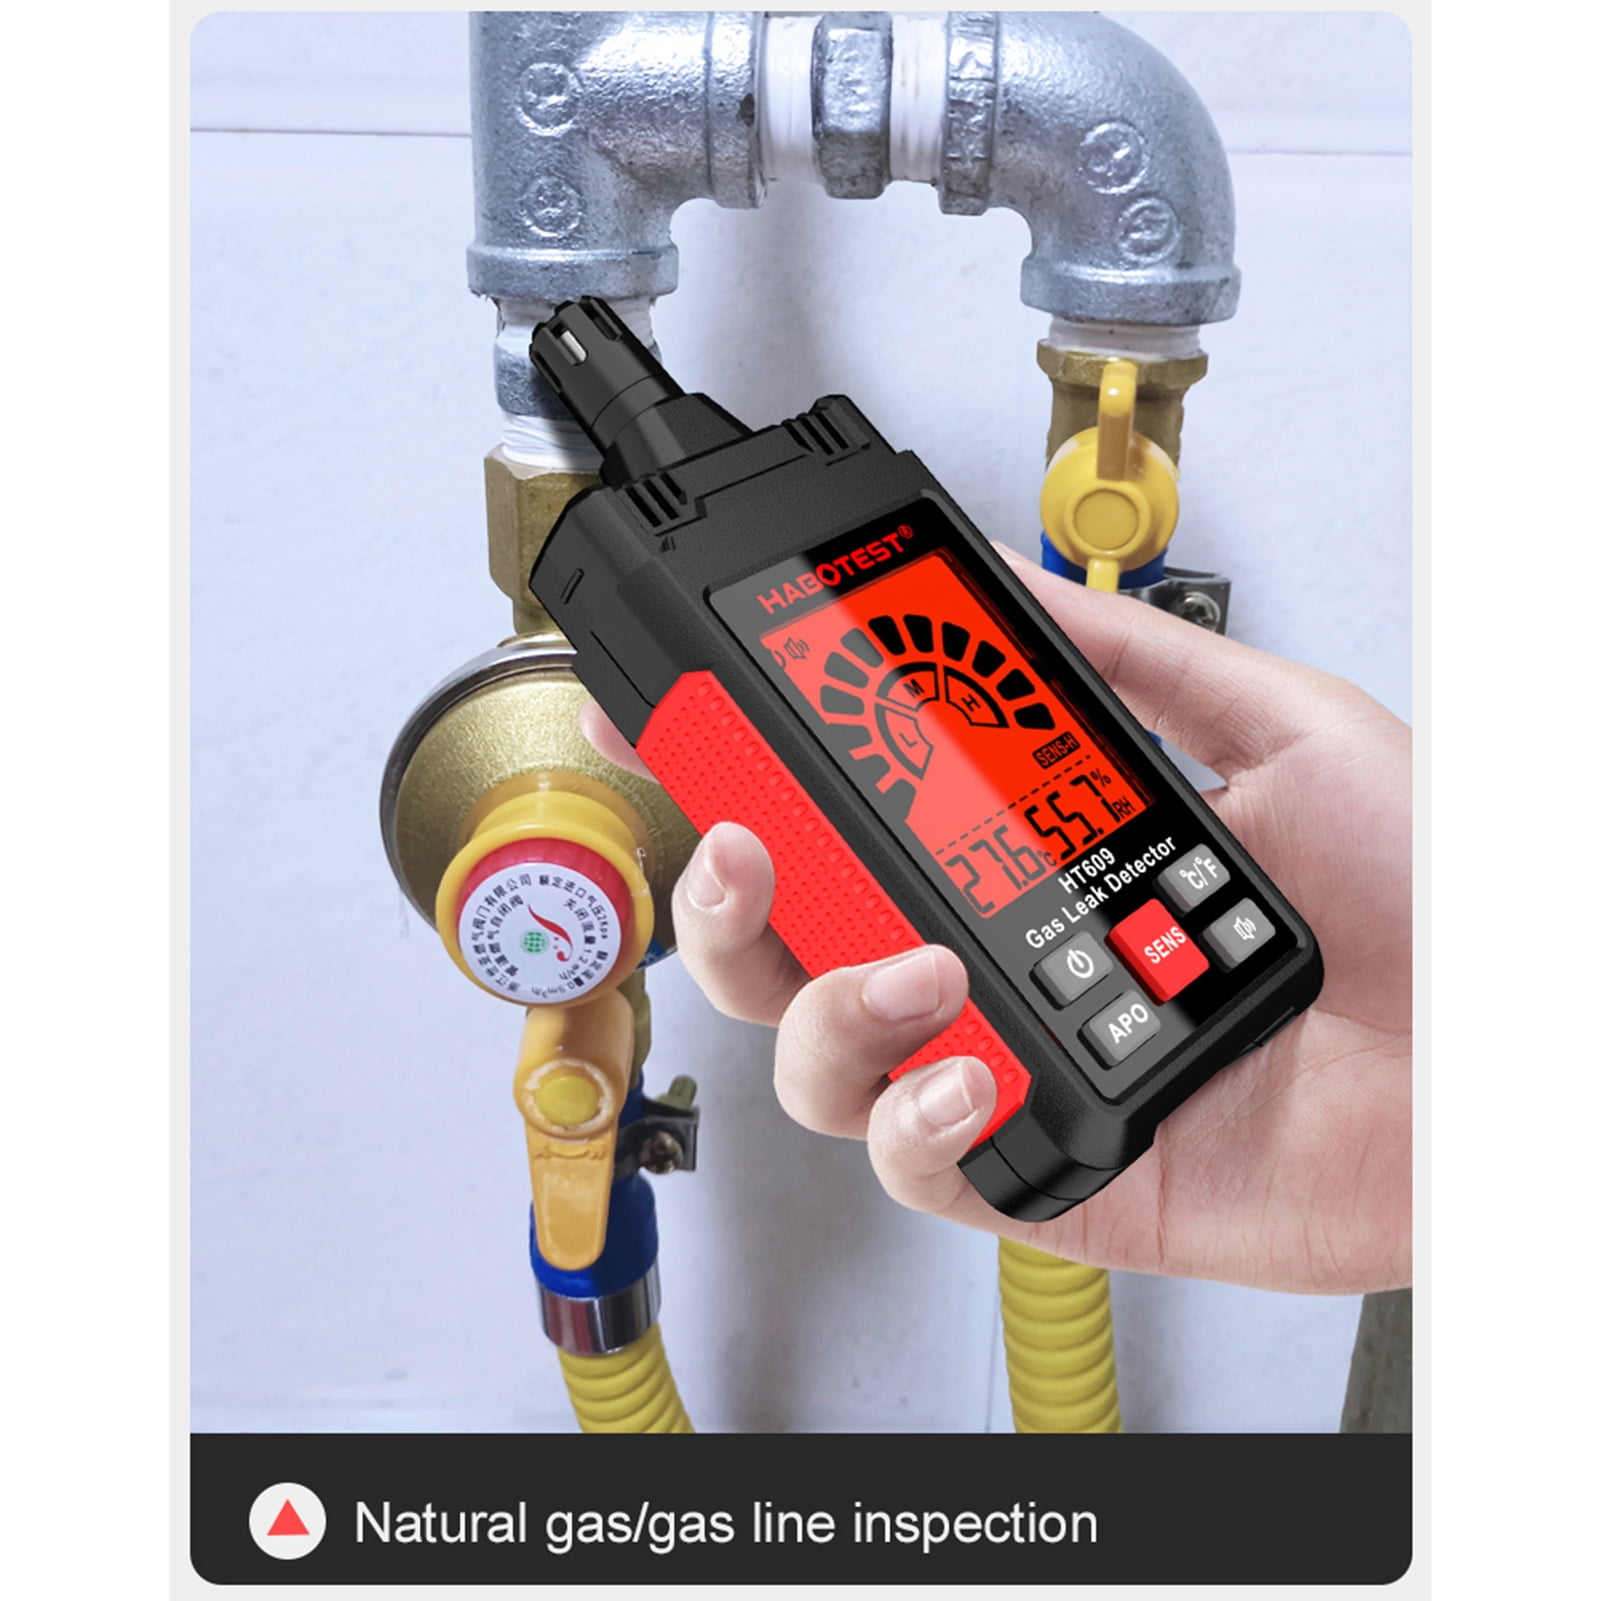 HT609 Gas Leak Detector with Temperature and Humidity Function